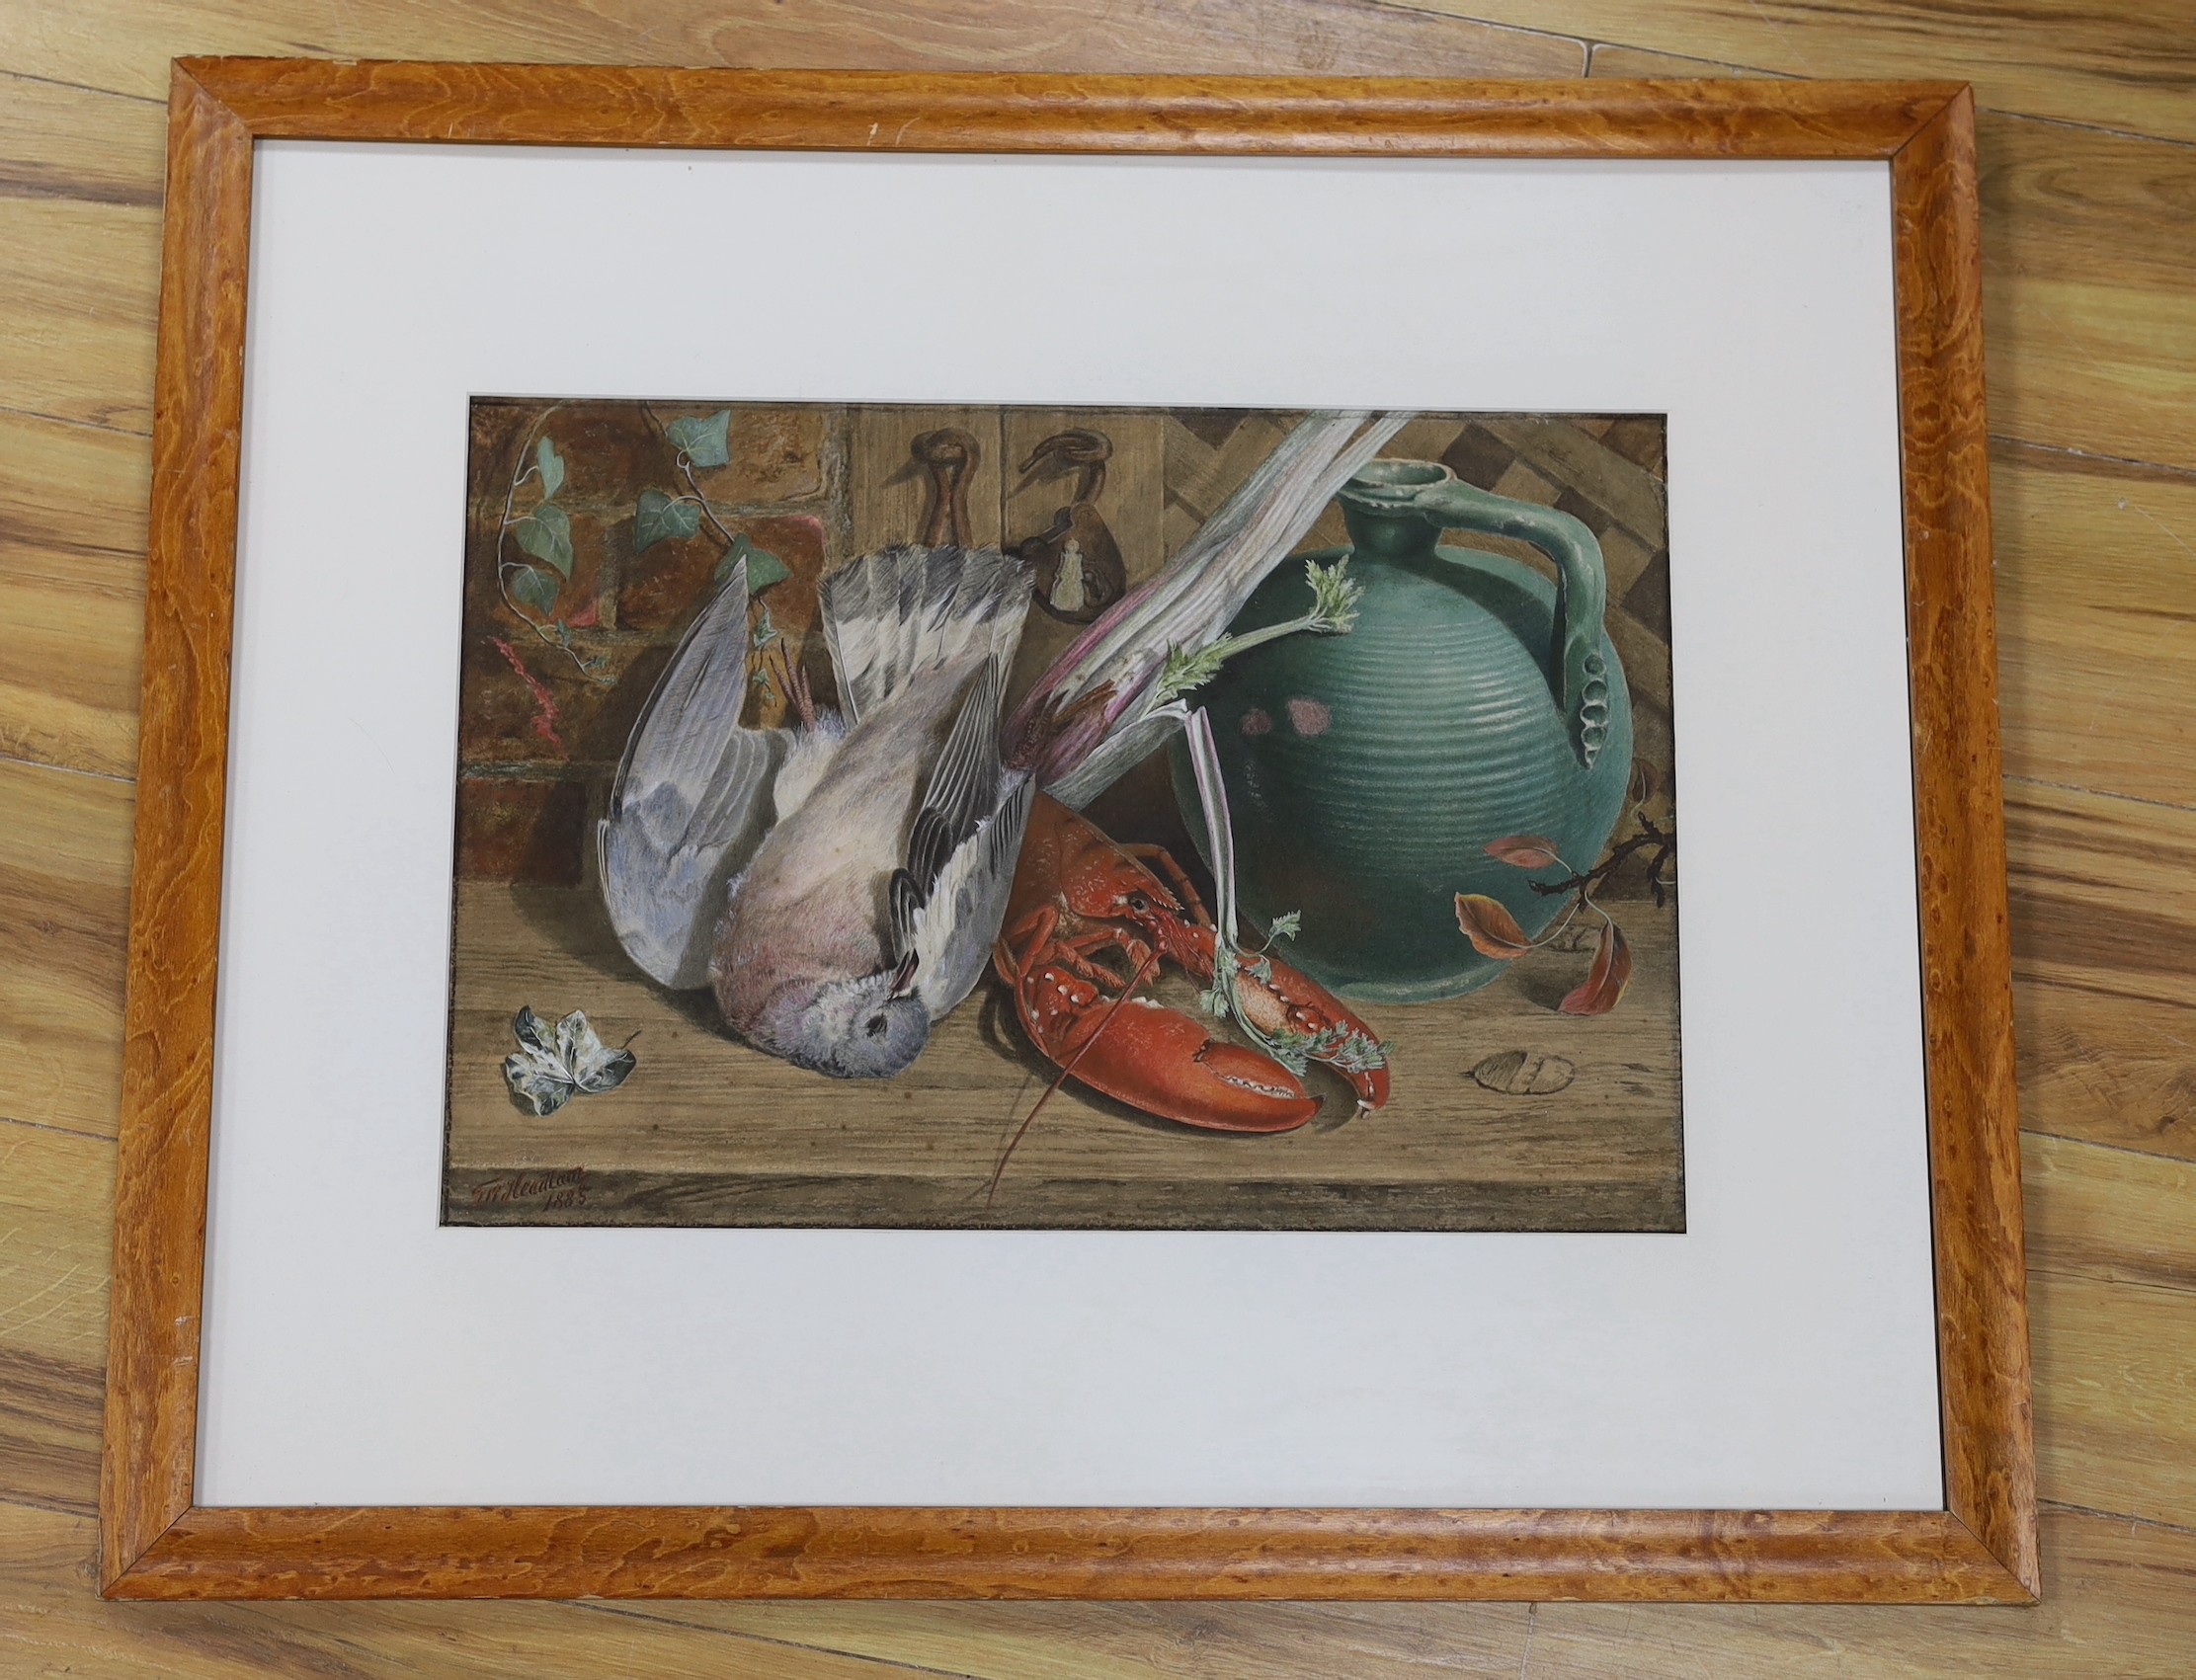 T.W. Headlam, watercolour, Still life of a dead pigeon, lobster and vase, signed and dated 1885, ESK stamp, 38 x 54cm